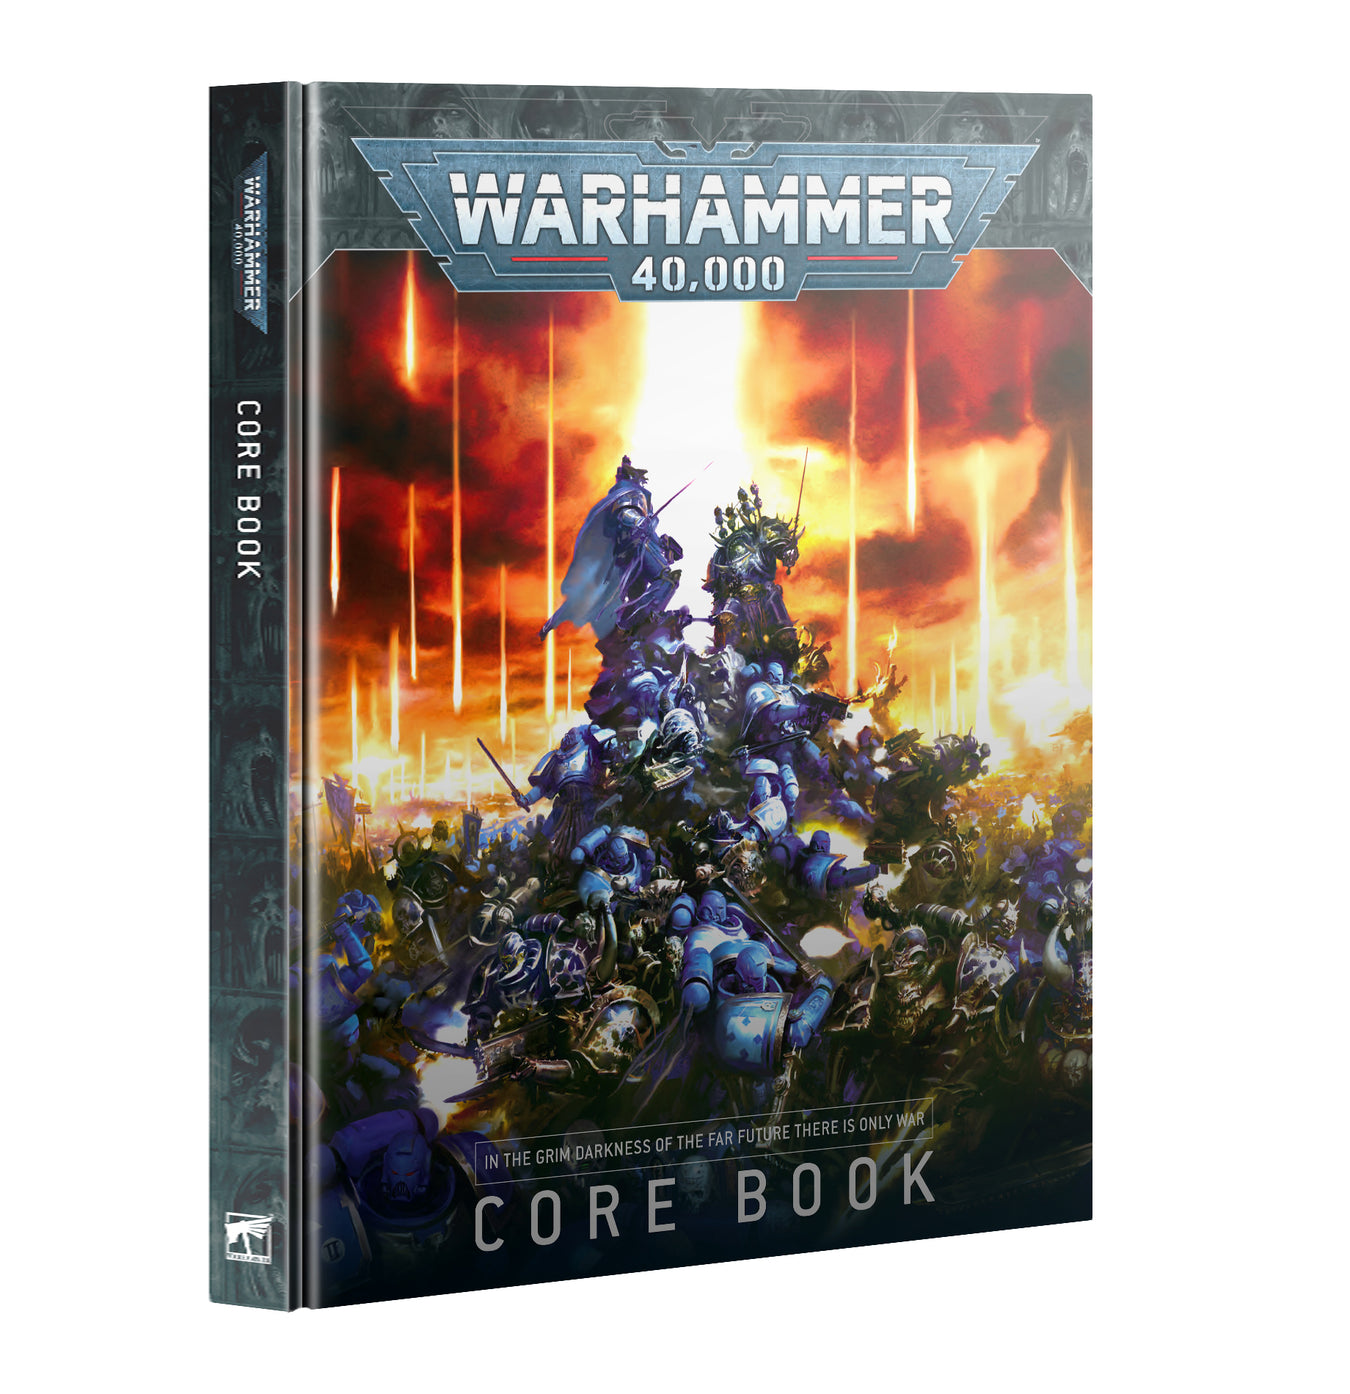 Shop All Warhammer Products